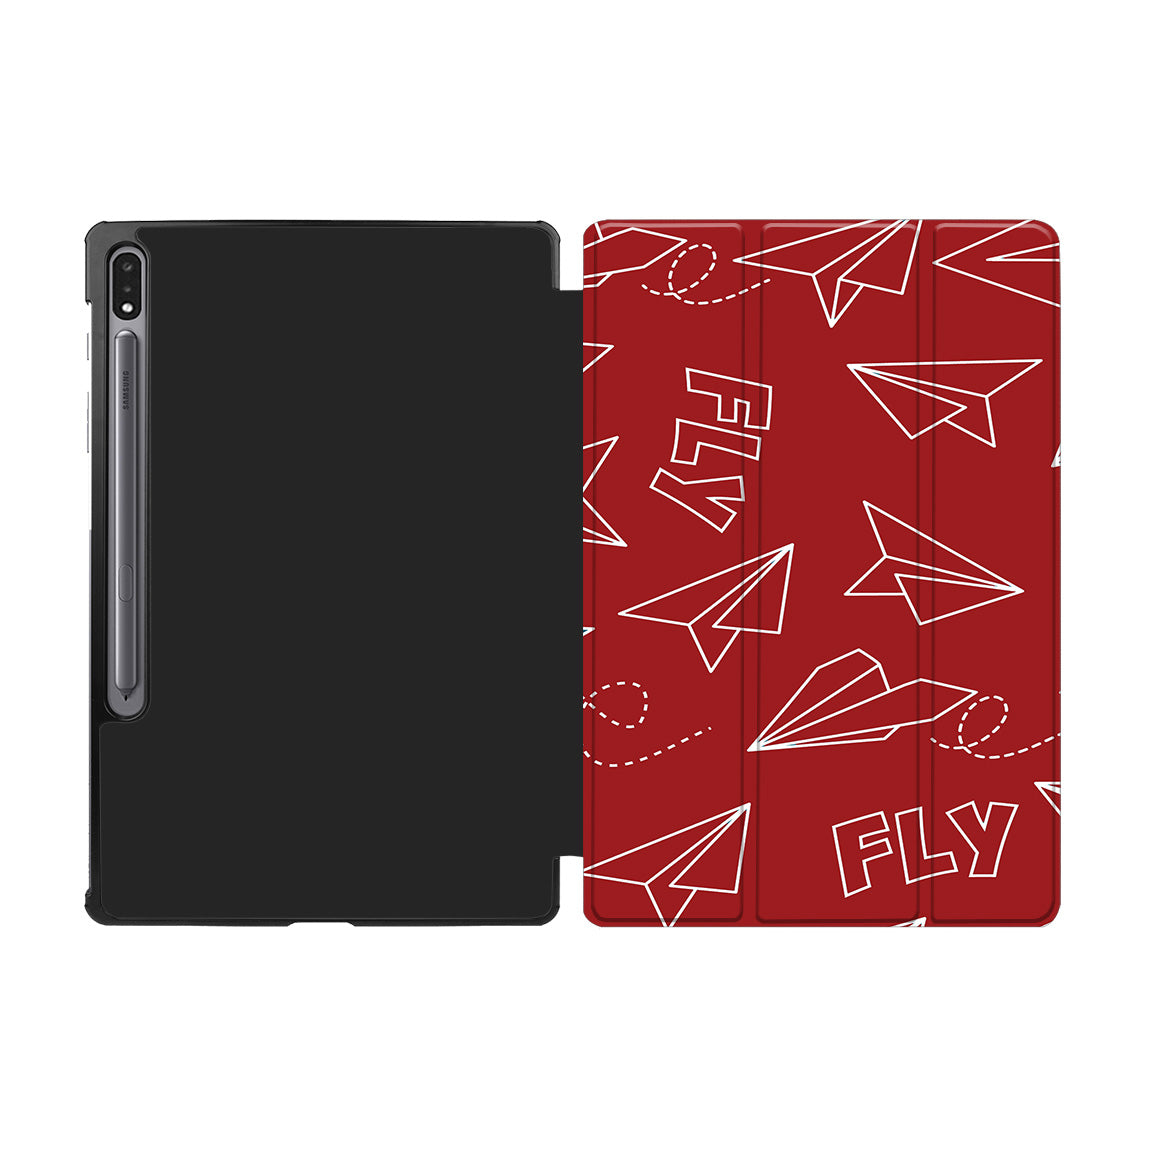 Paper Airplane & Fly-Red Designed Samsung Tablet Cases